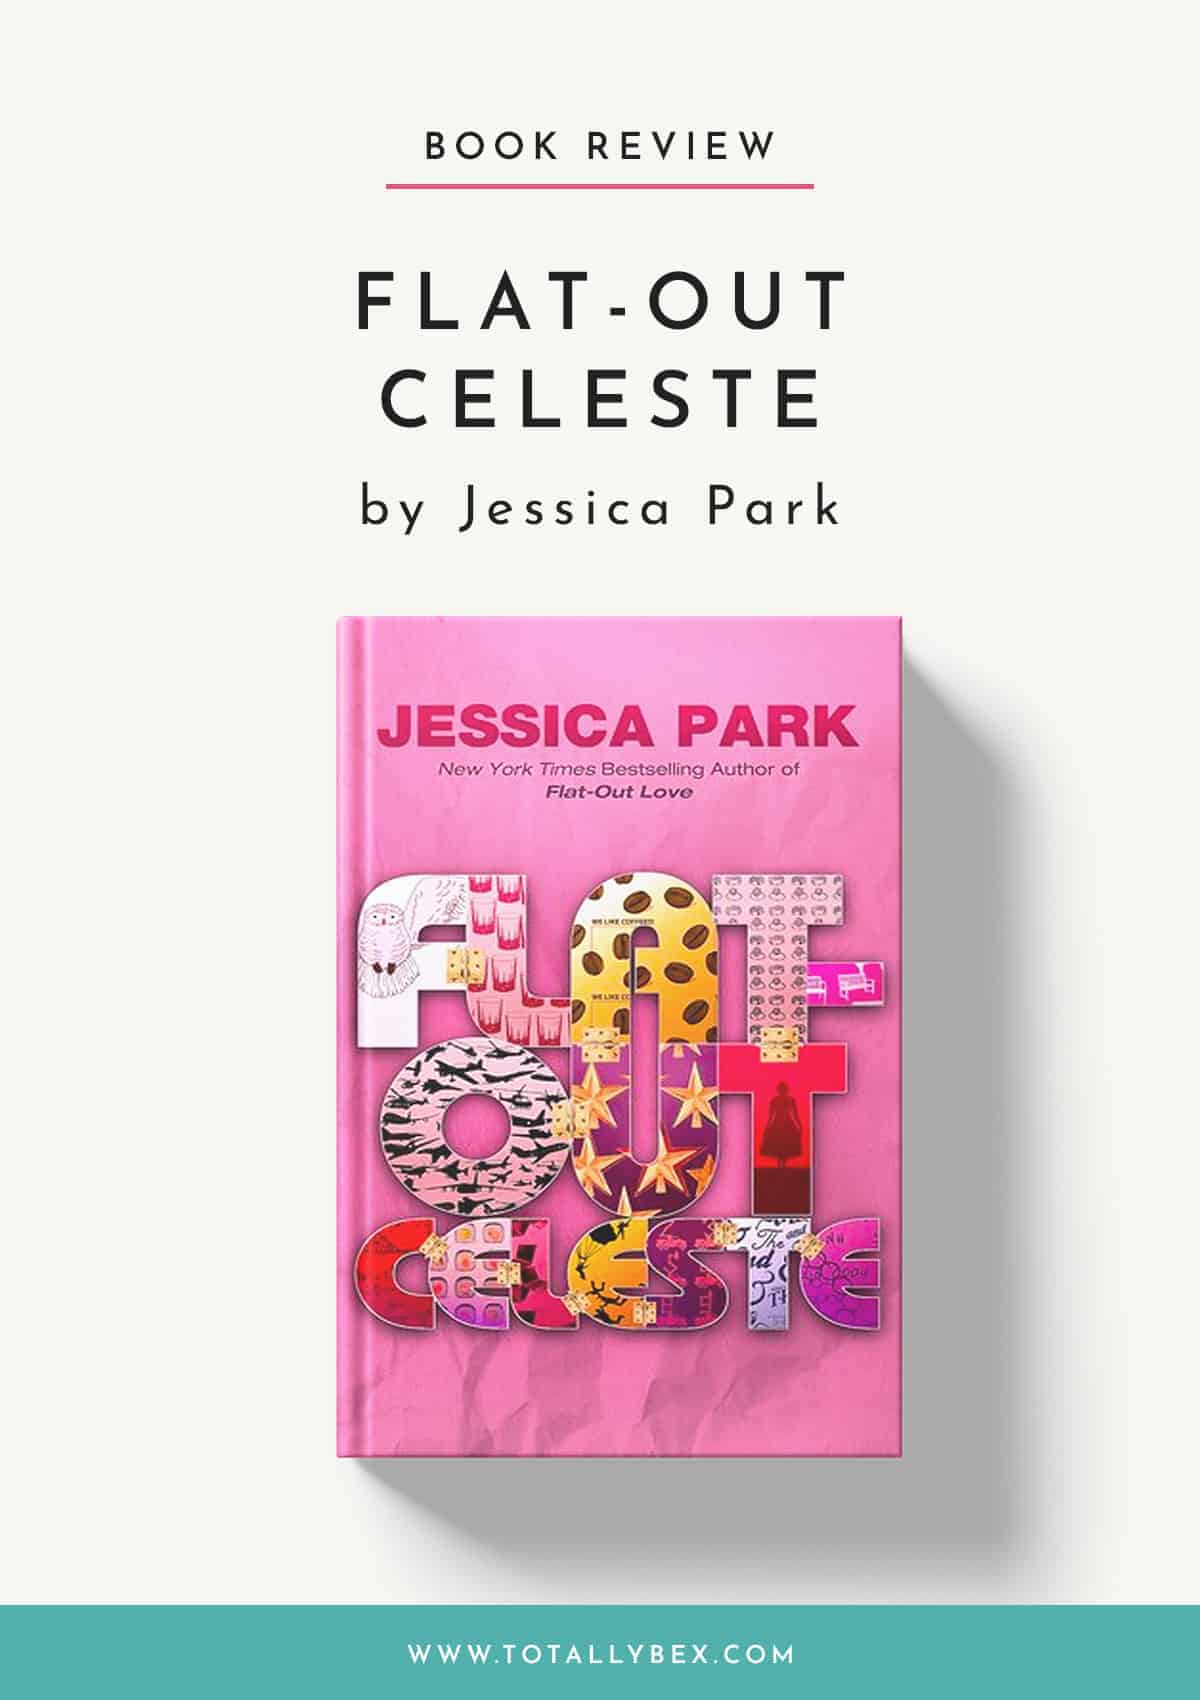 Flat-Out Celeste by Jessica Park – Quirky Brilliance!